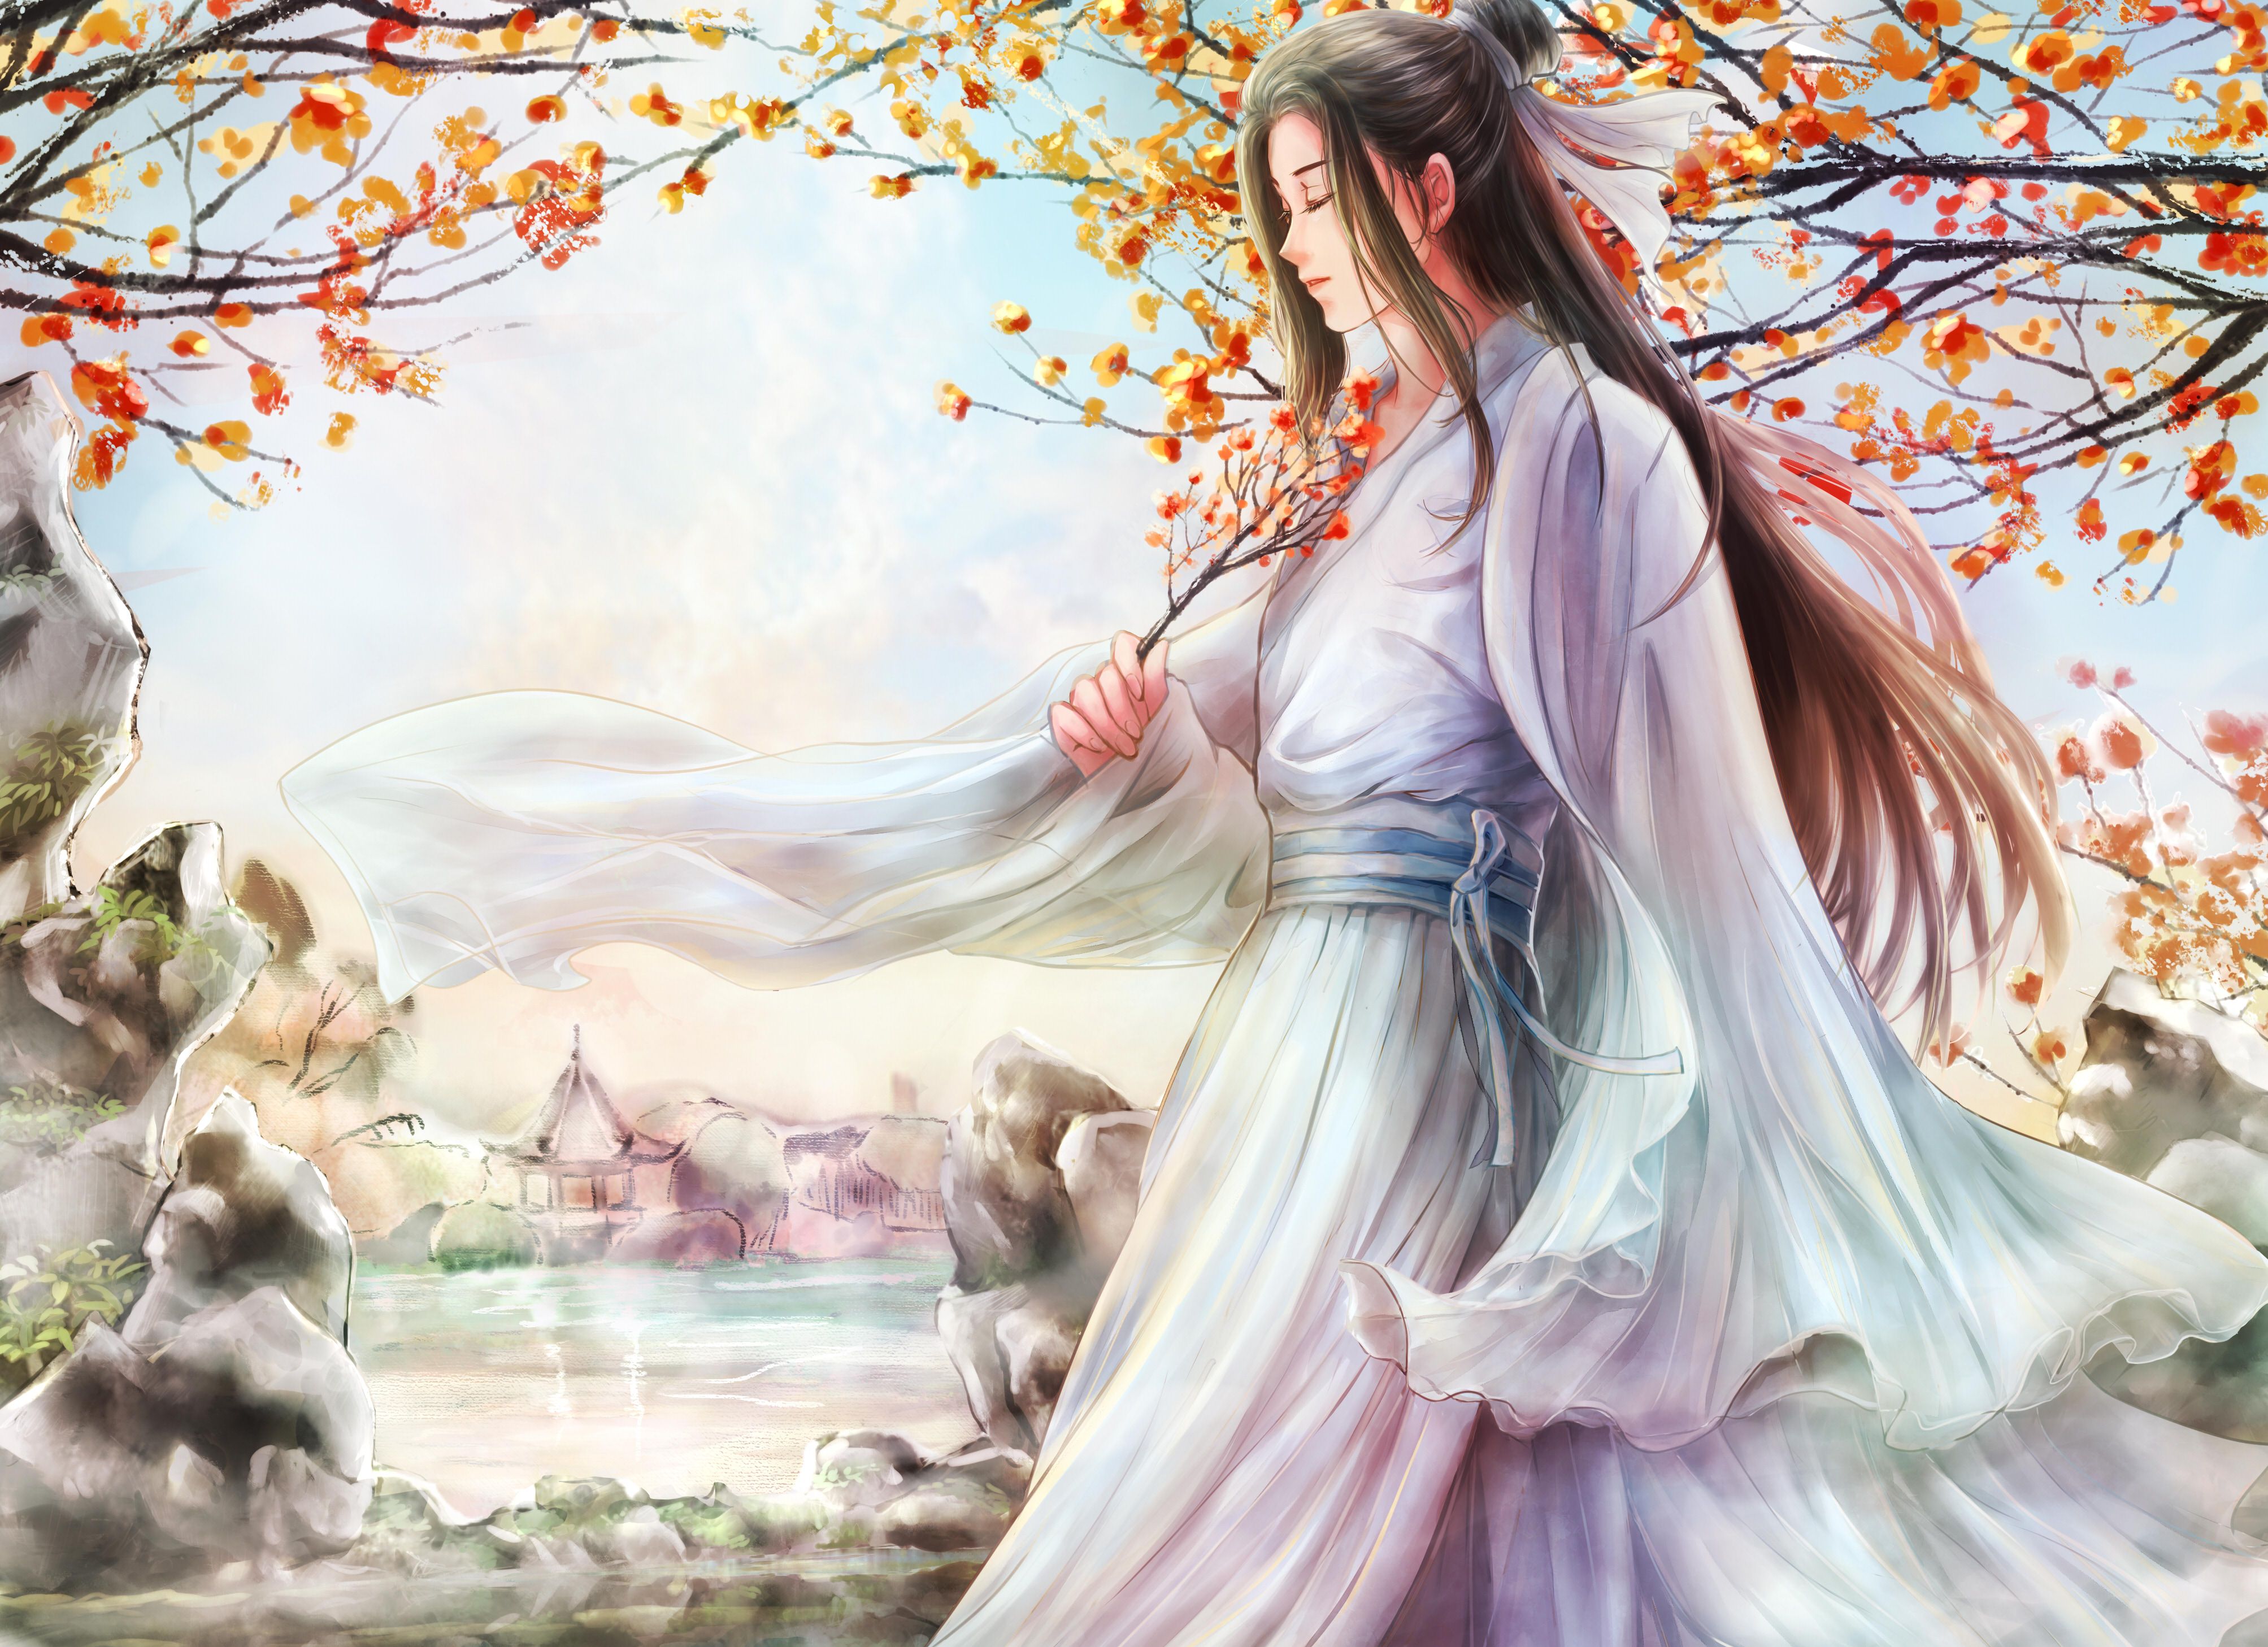 Chinese Girl 61  Other  Anime Background Wallpapers on Desktop Nexus  Image 397721